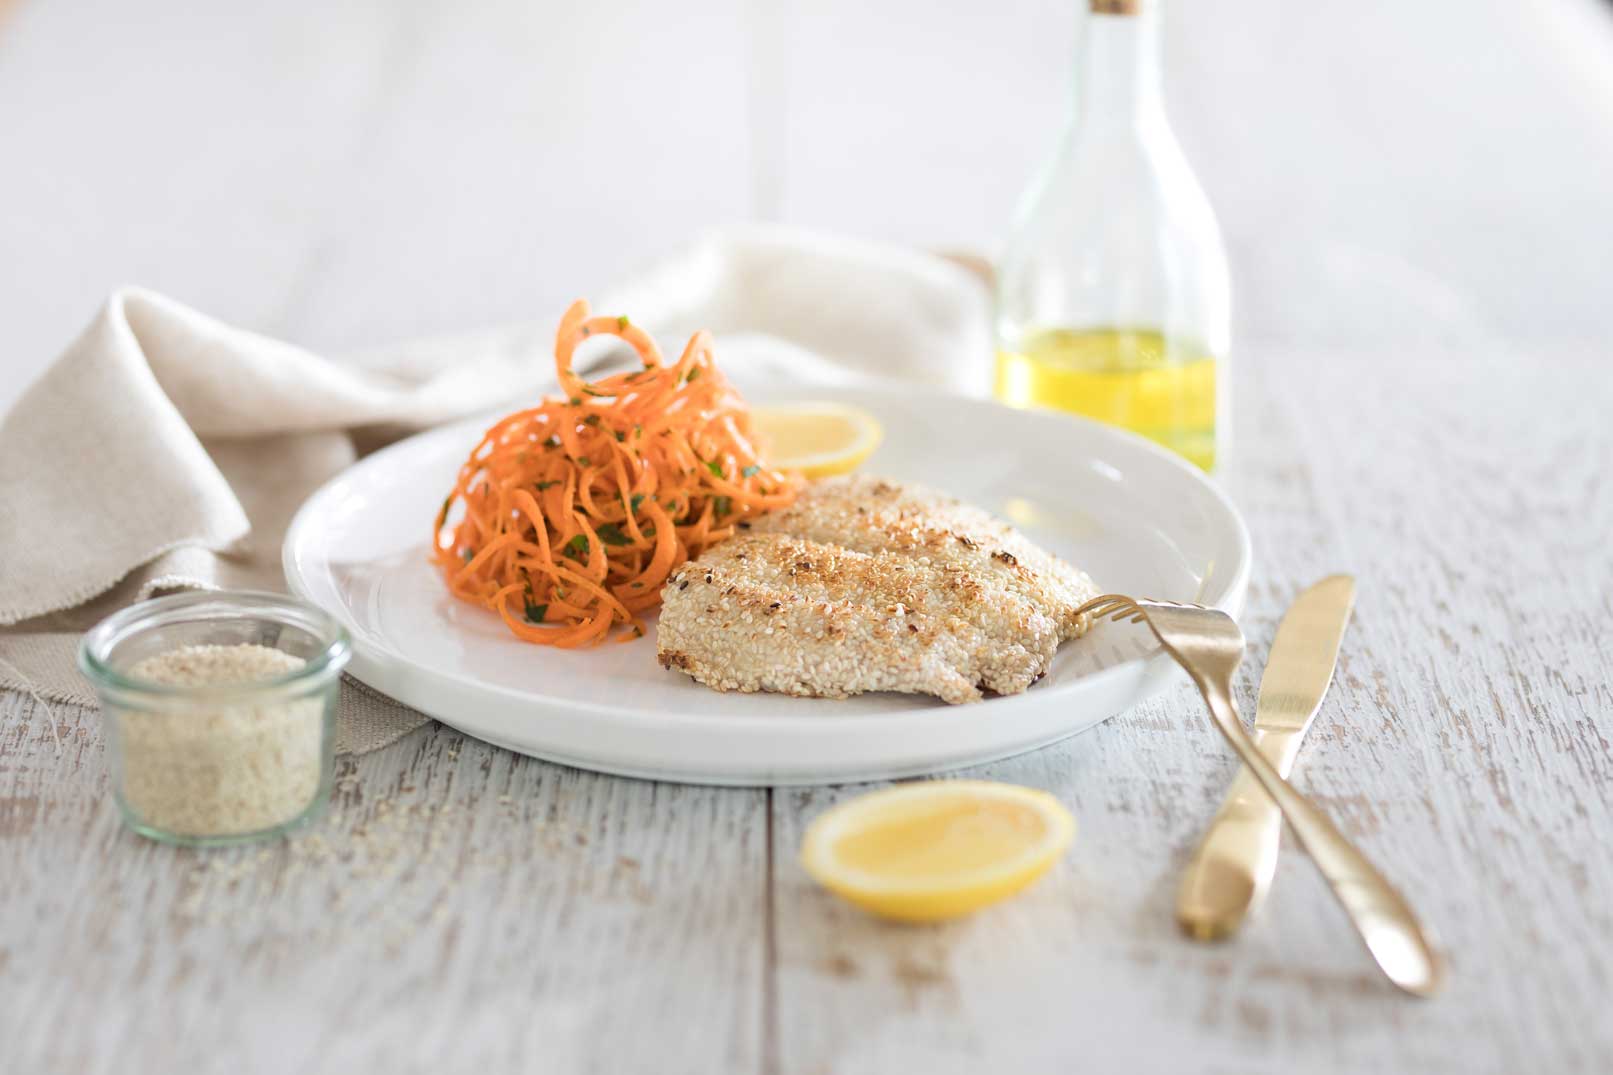 One sesame crusted snapper fillet with carrot salad and a lemon wedge on a white plate served with a gold knife and fork, small glass container of sesame seeds and bottle of dressing and cloth napkin on the side.